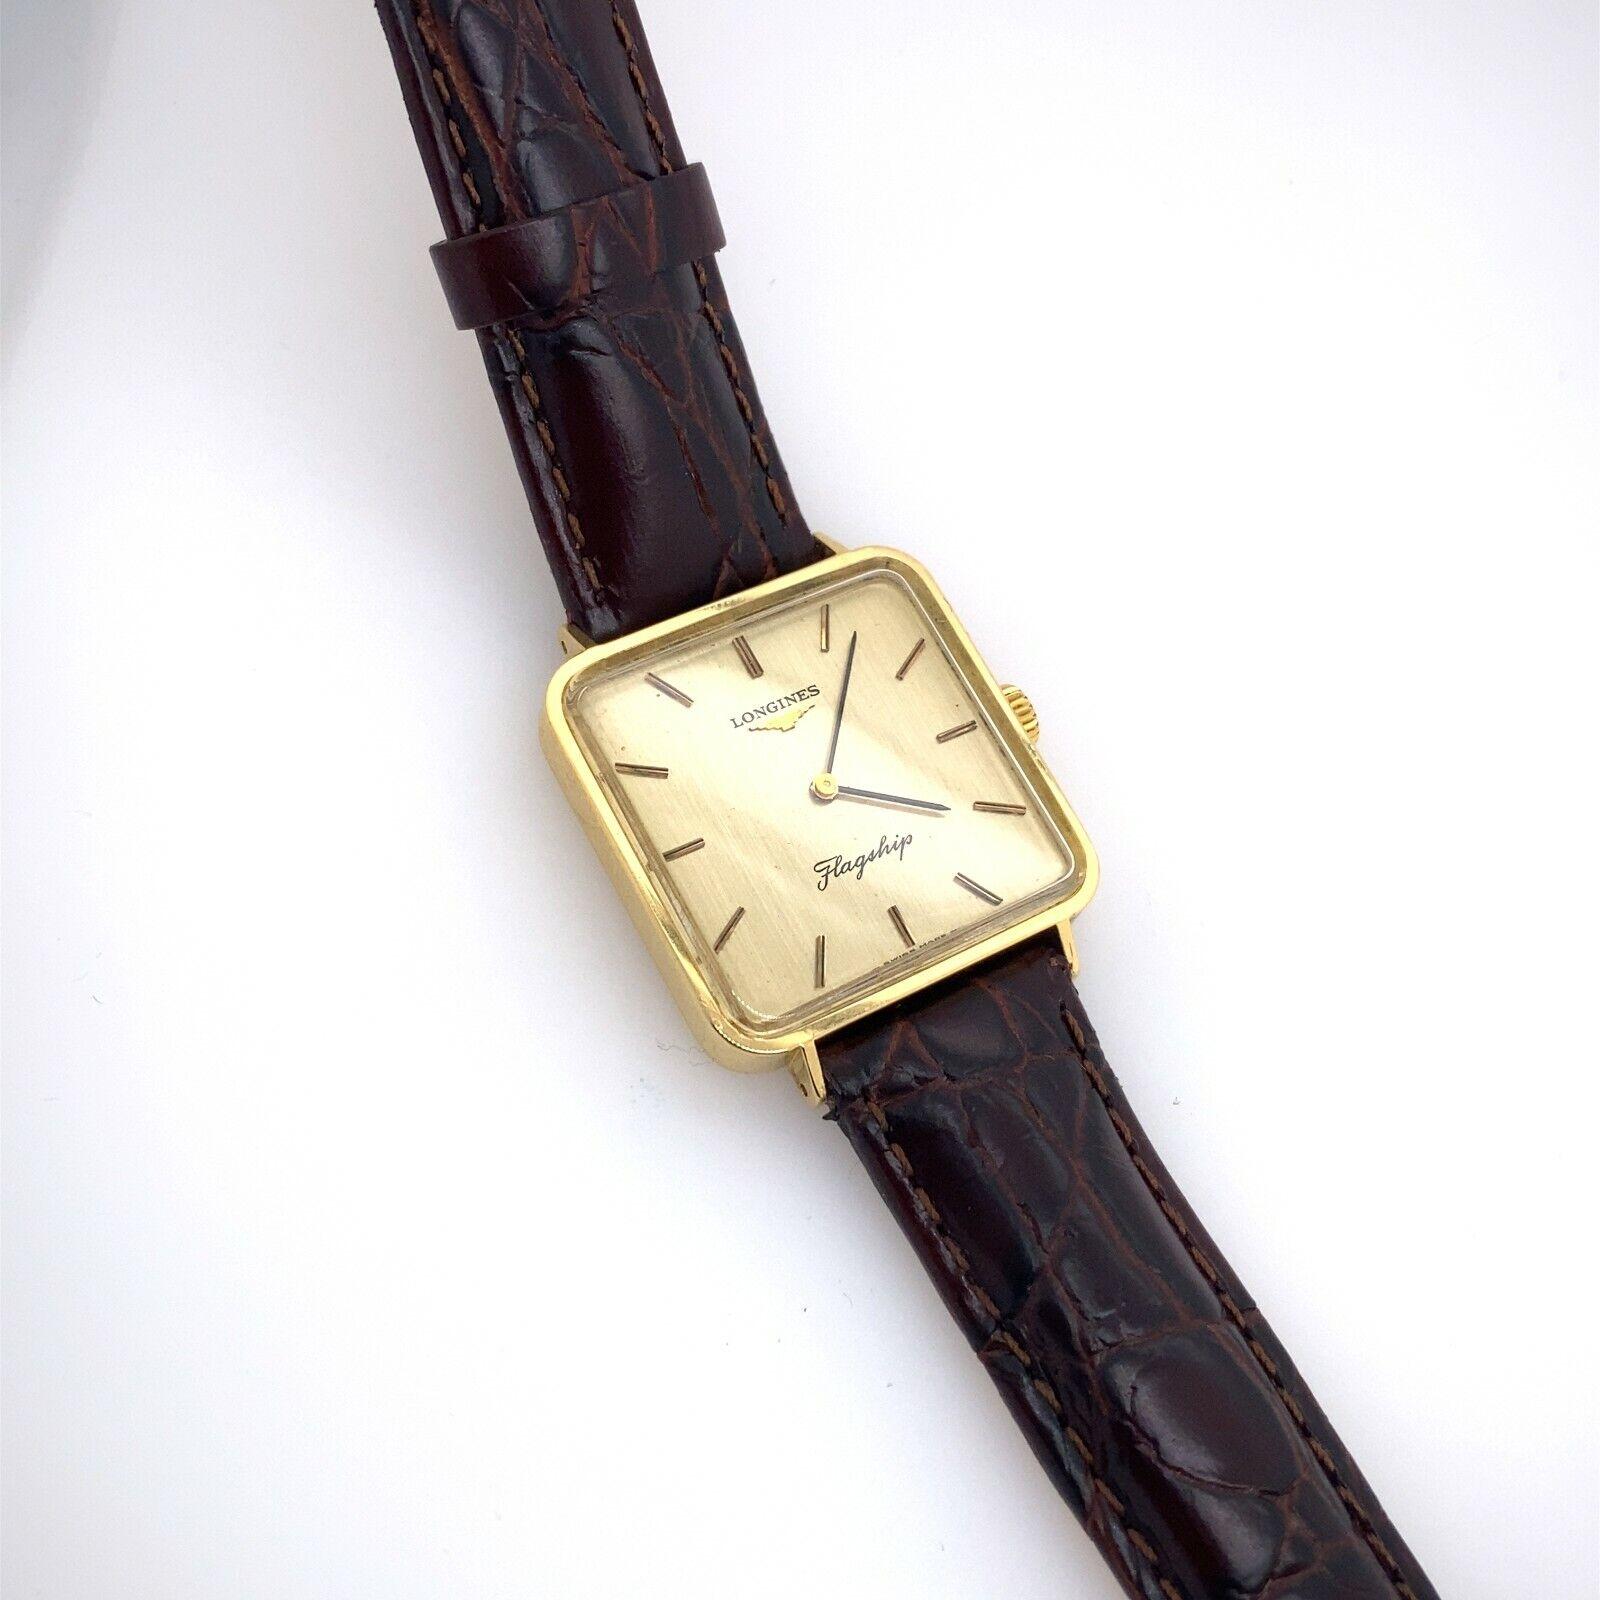 Vintage 9ct Yellow Gold Movado Watch, Cushion Shape Case

Cushion Shape Case In fair condition With hairline crack on the dial.

Additional Information:
Case Size: 50x 30.50mm
Dial Colour: White
Lug Width: 18 mm
Case Thickness: 6mm
Case Material: